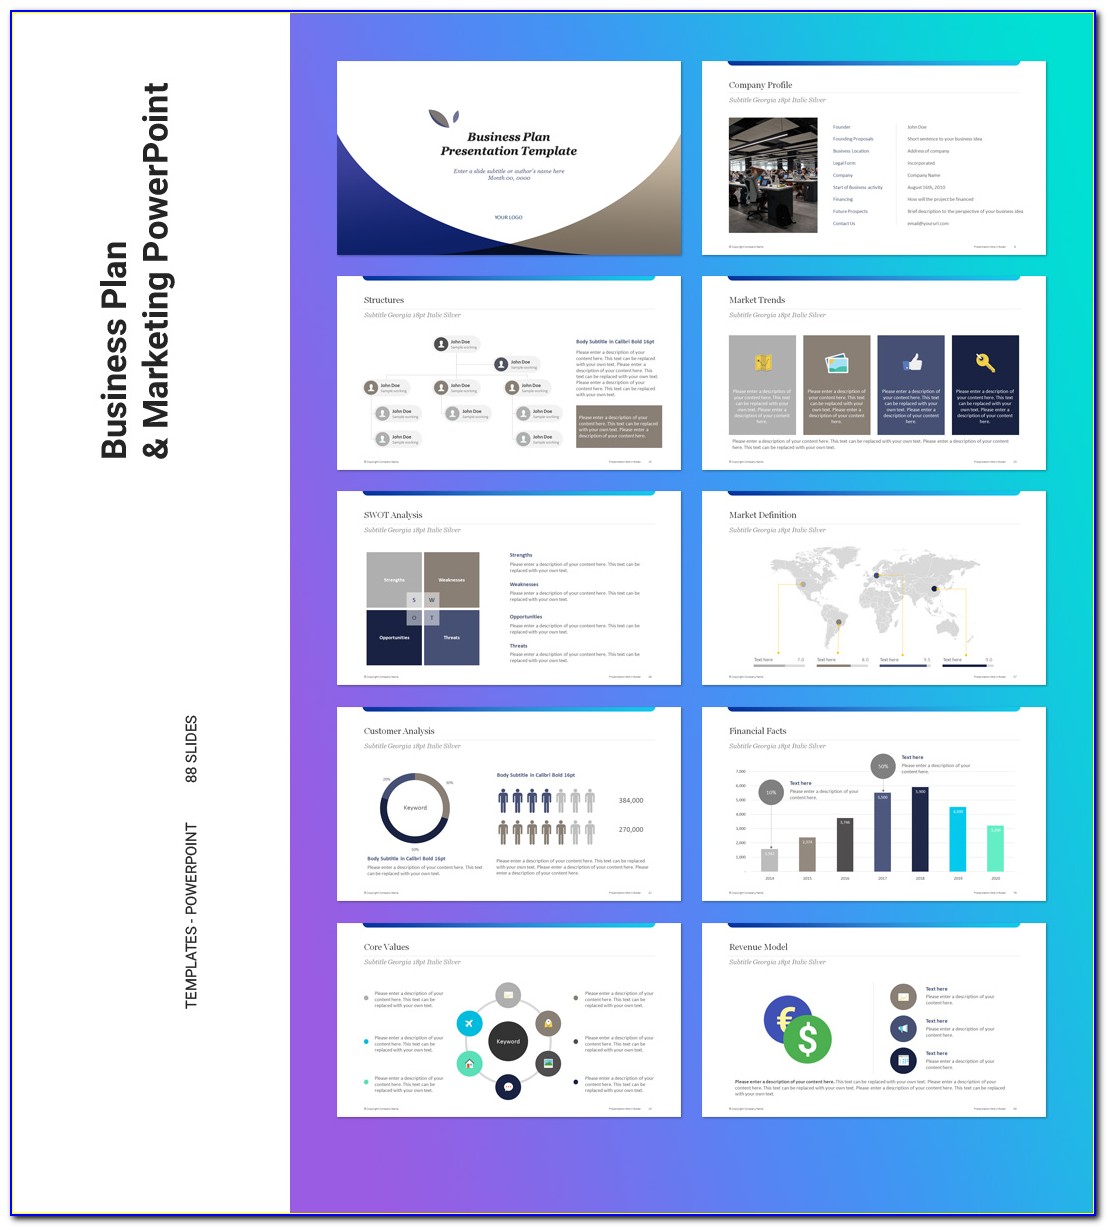 Business Plan Ppt Templates Free Download